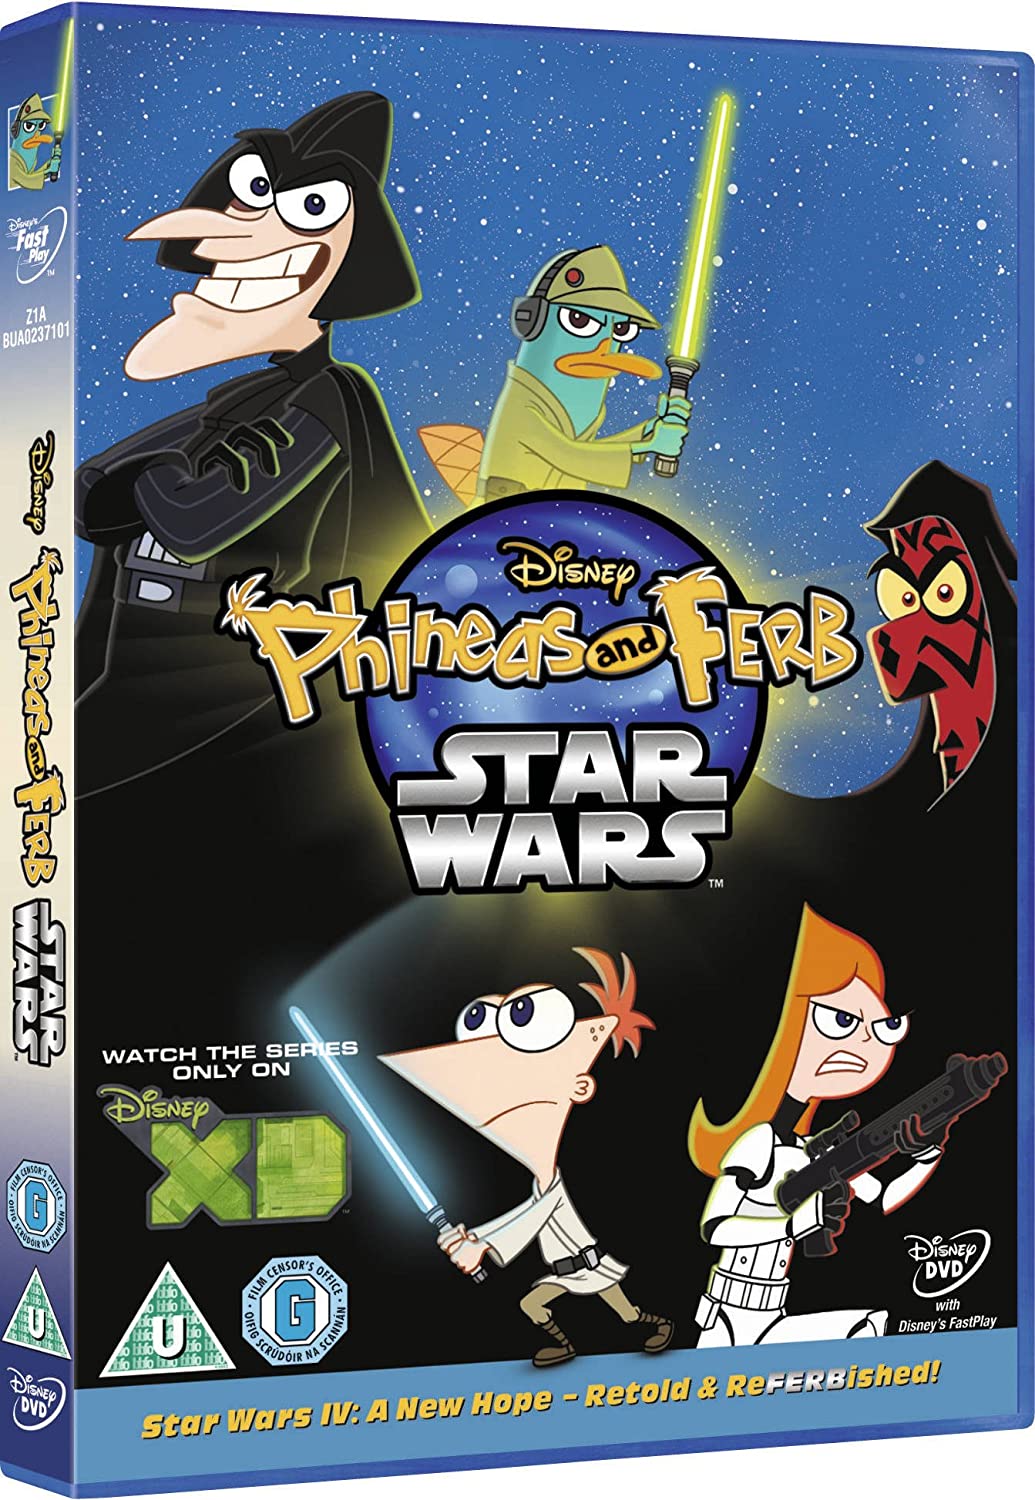 Phineas and Ferb: Star Wars - Comedy [DVD]